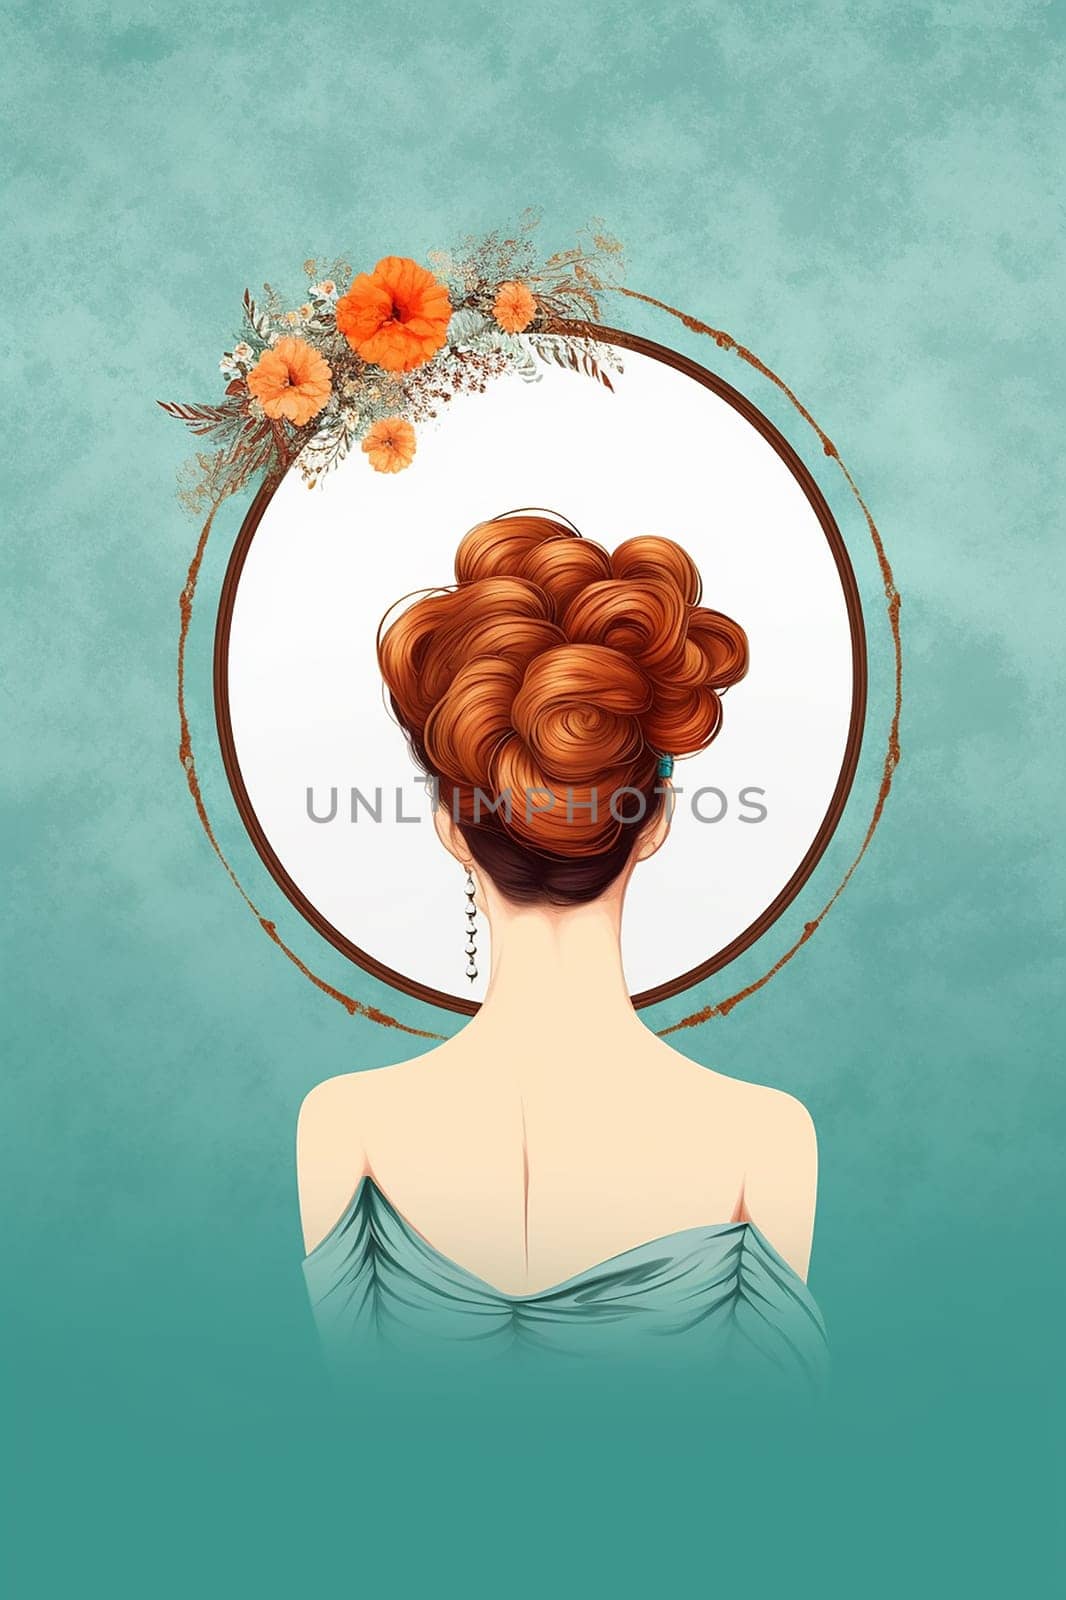 Elegant illustration of a woman's back with stylized hair and floral adornment. by Hype2art